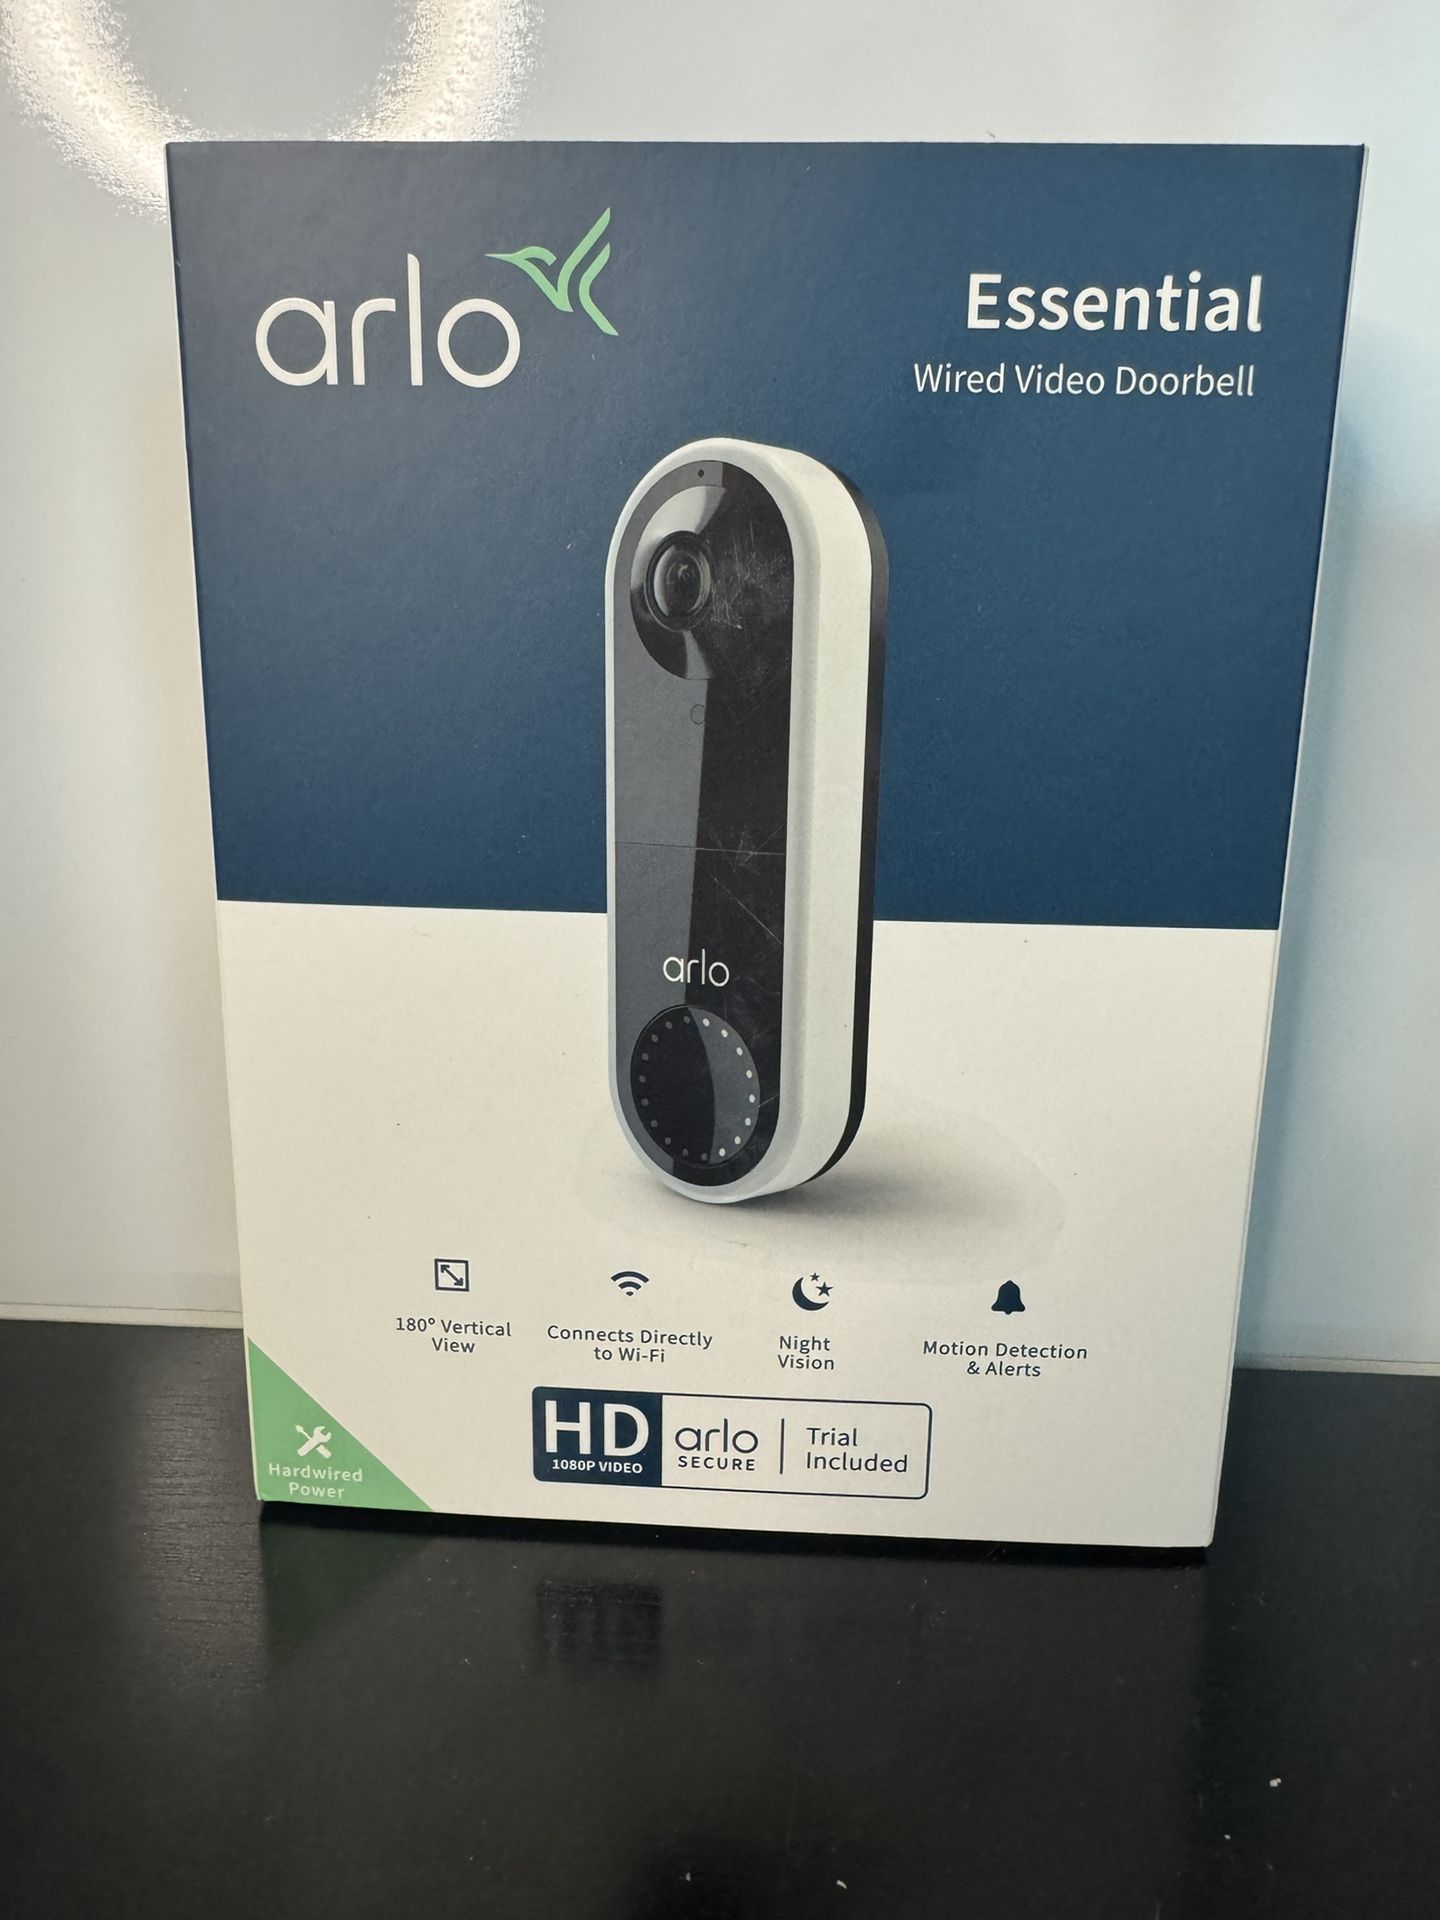 Arlo - Essential Wi-Fi Smart Video Doorbell - Wired ($130 Retail)